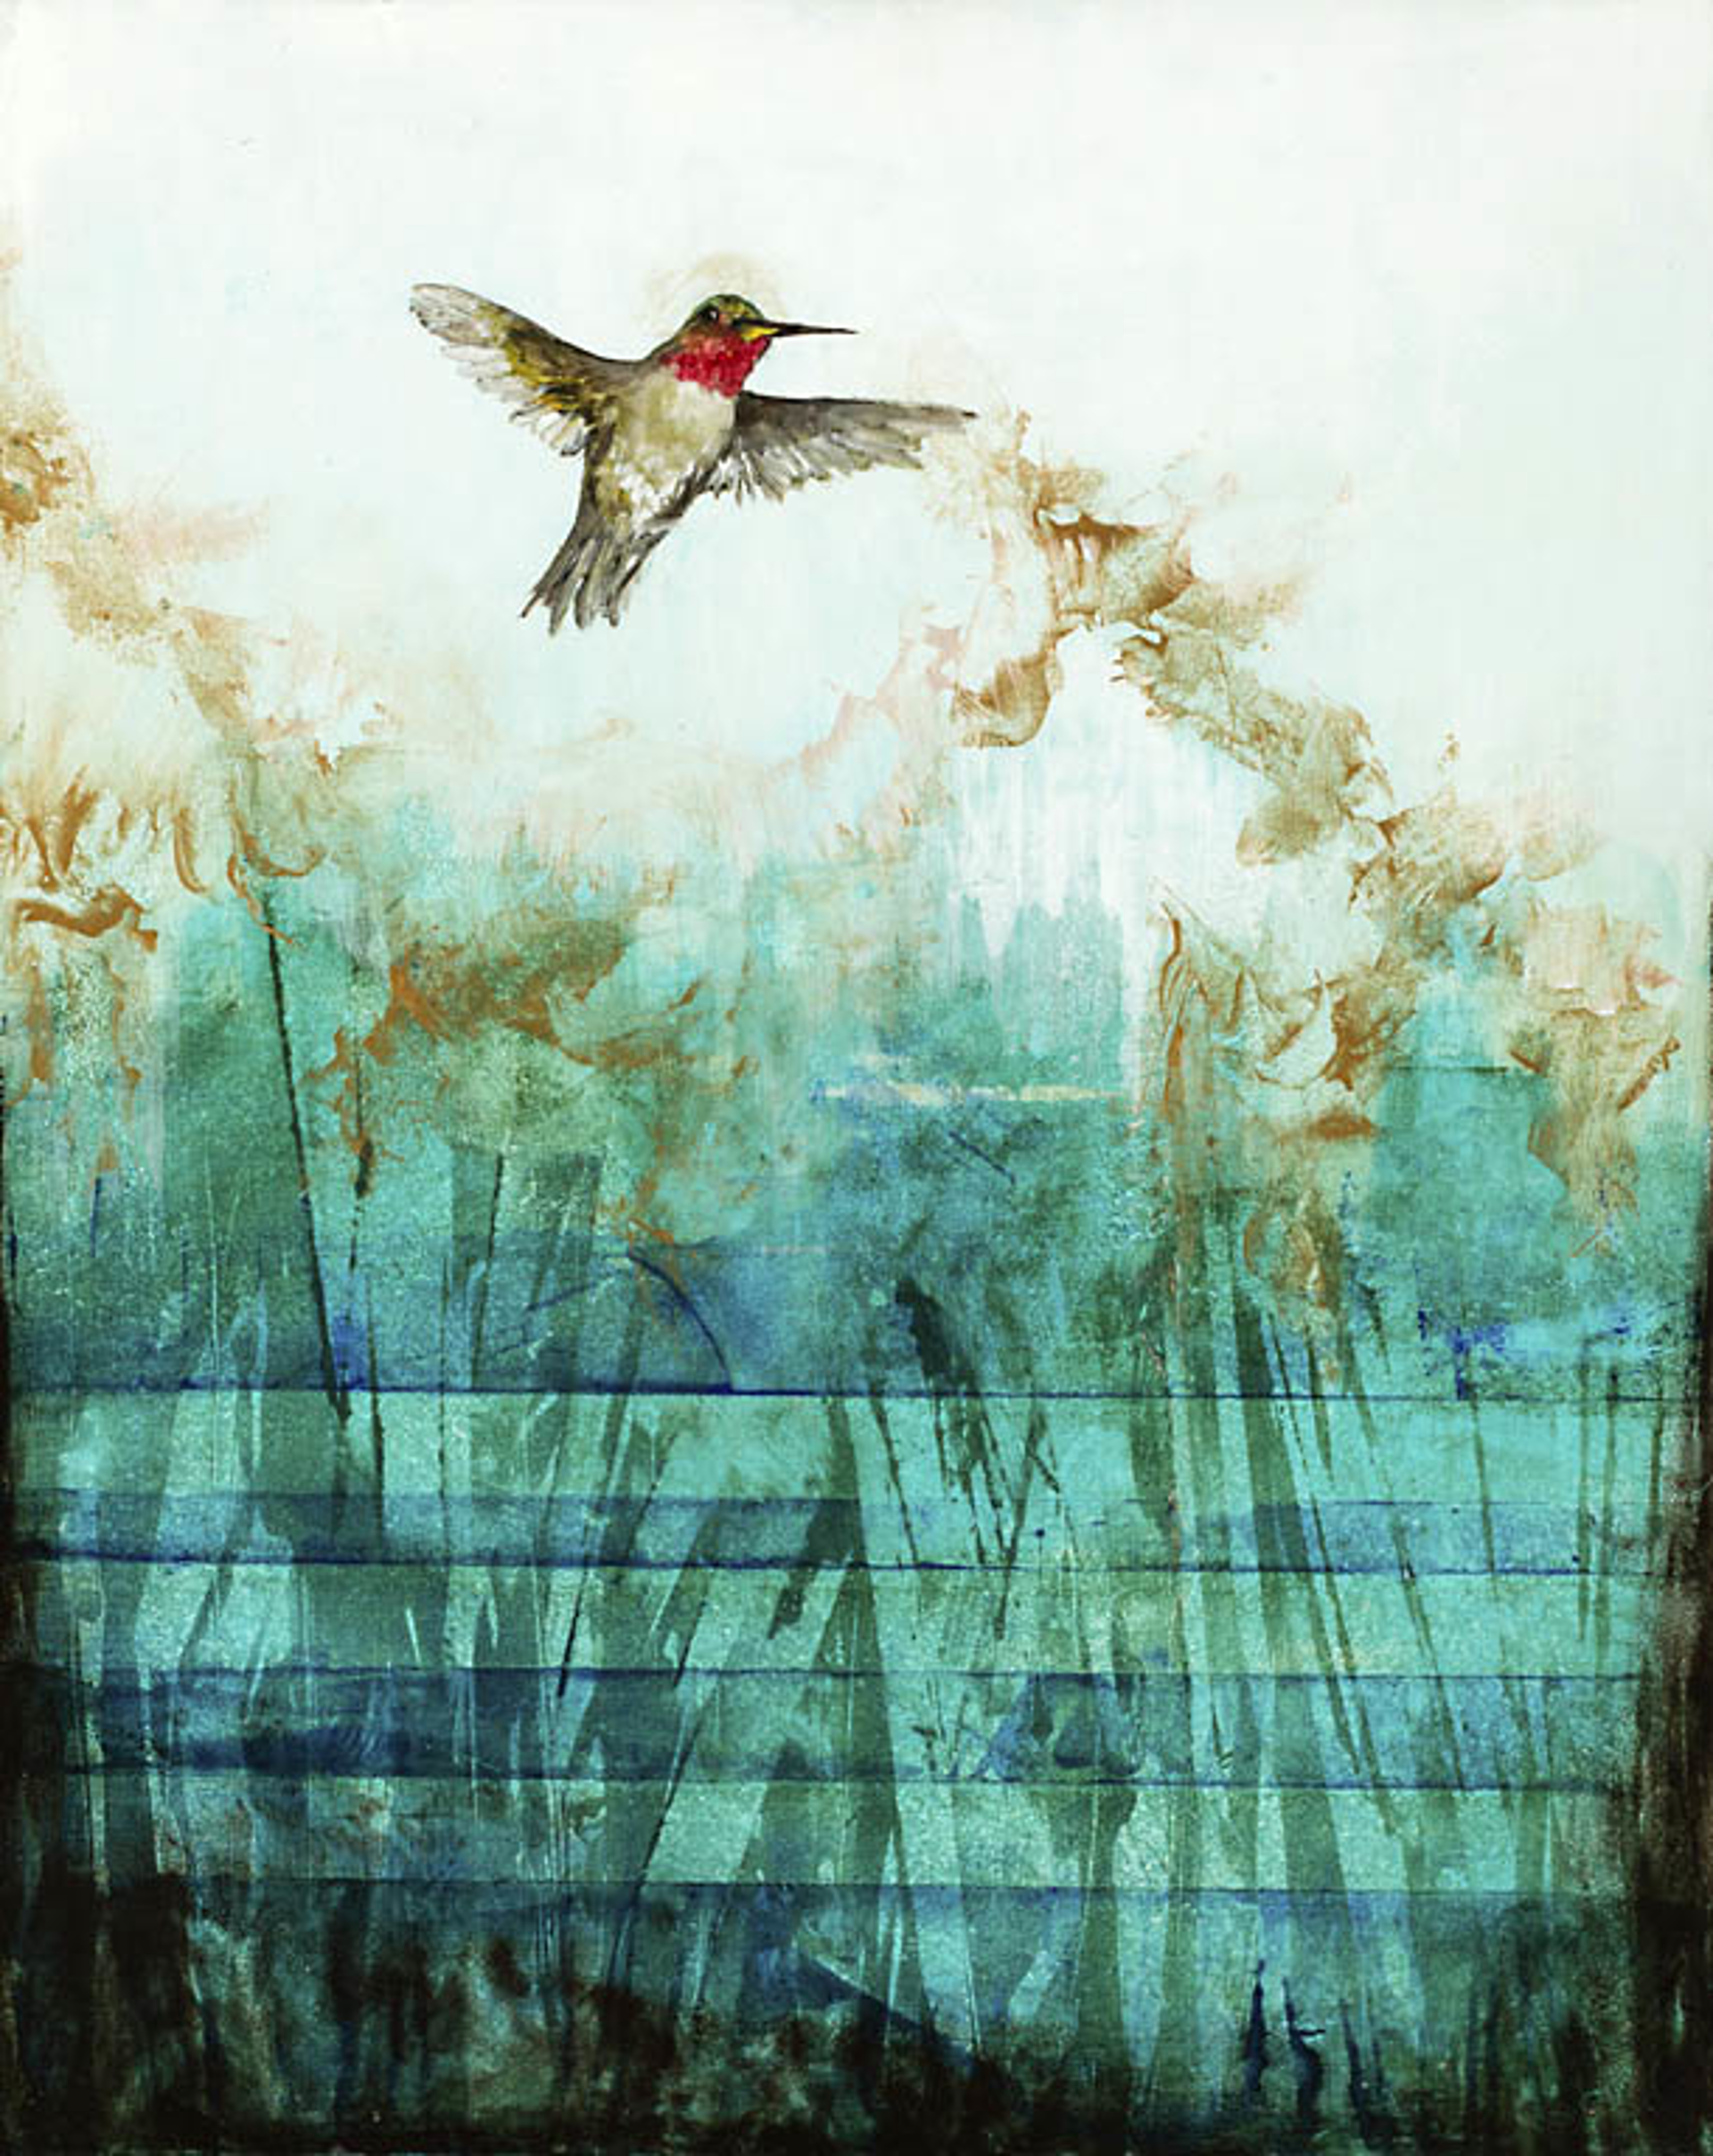 Contemporary Oil Painting Of A Humming Bird In Flight Featuring An Abstract Background Of Blue Green Faded To White, By Jenna Von Benedikt